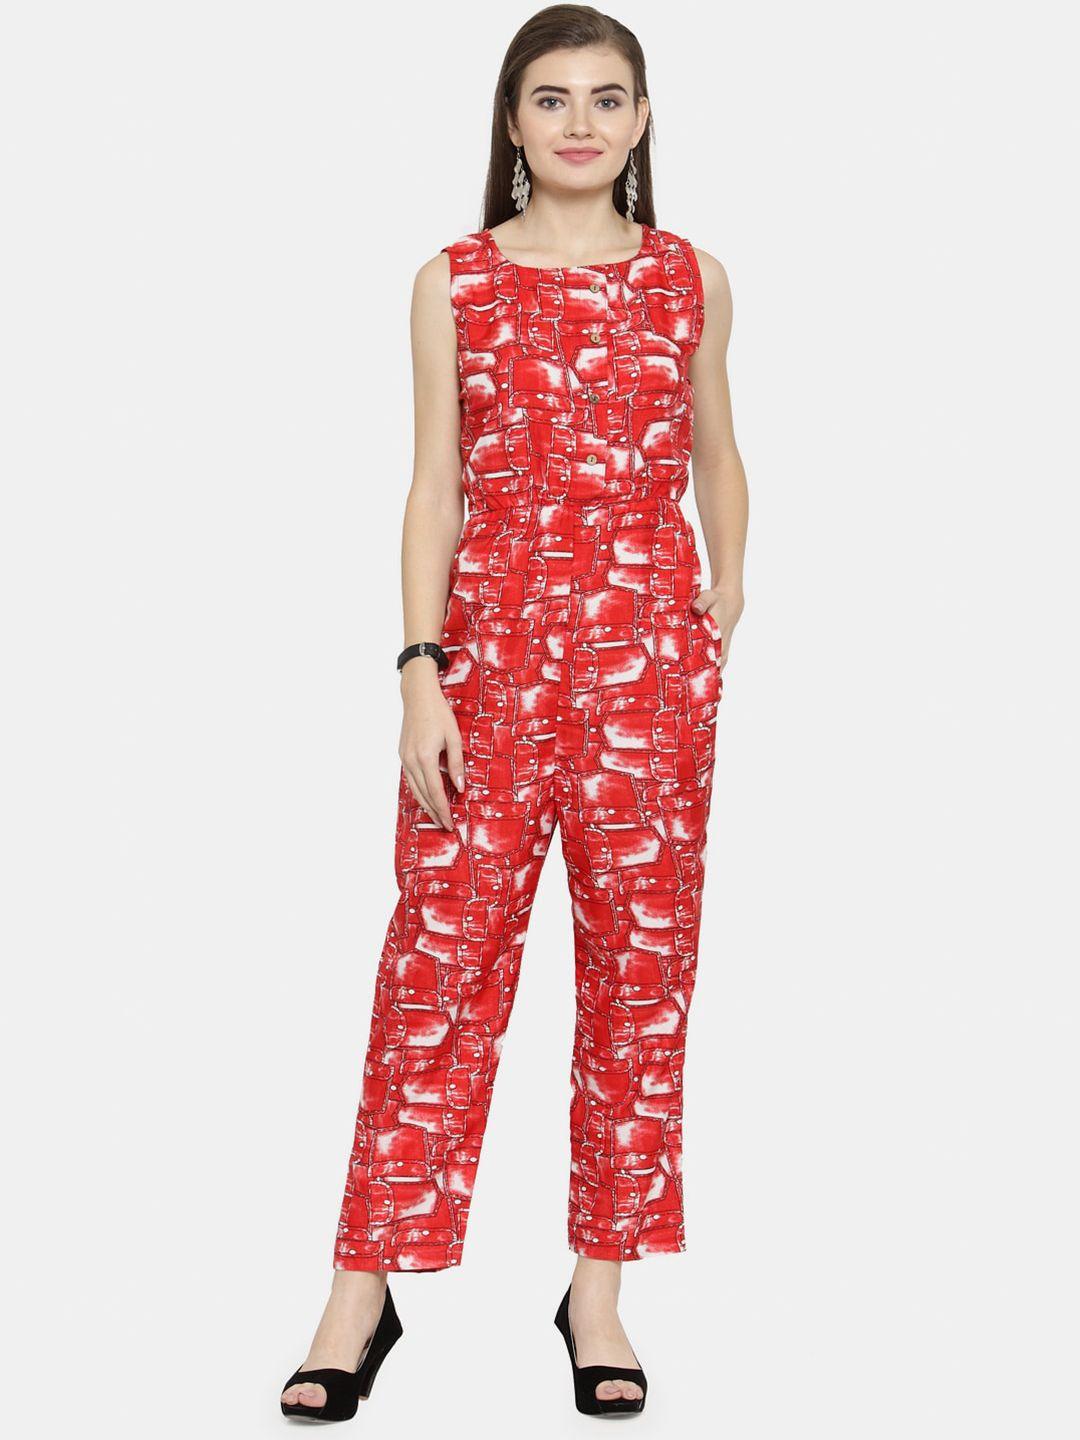 enchanted drapes red & white printed basic jumpsuit